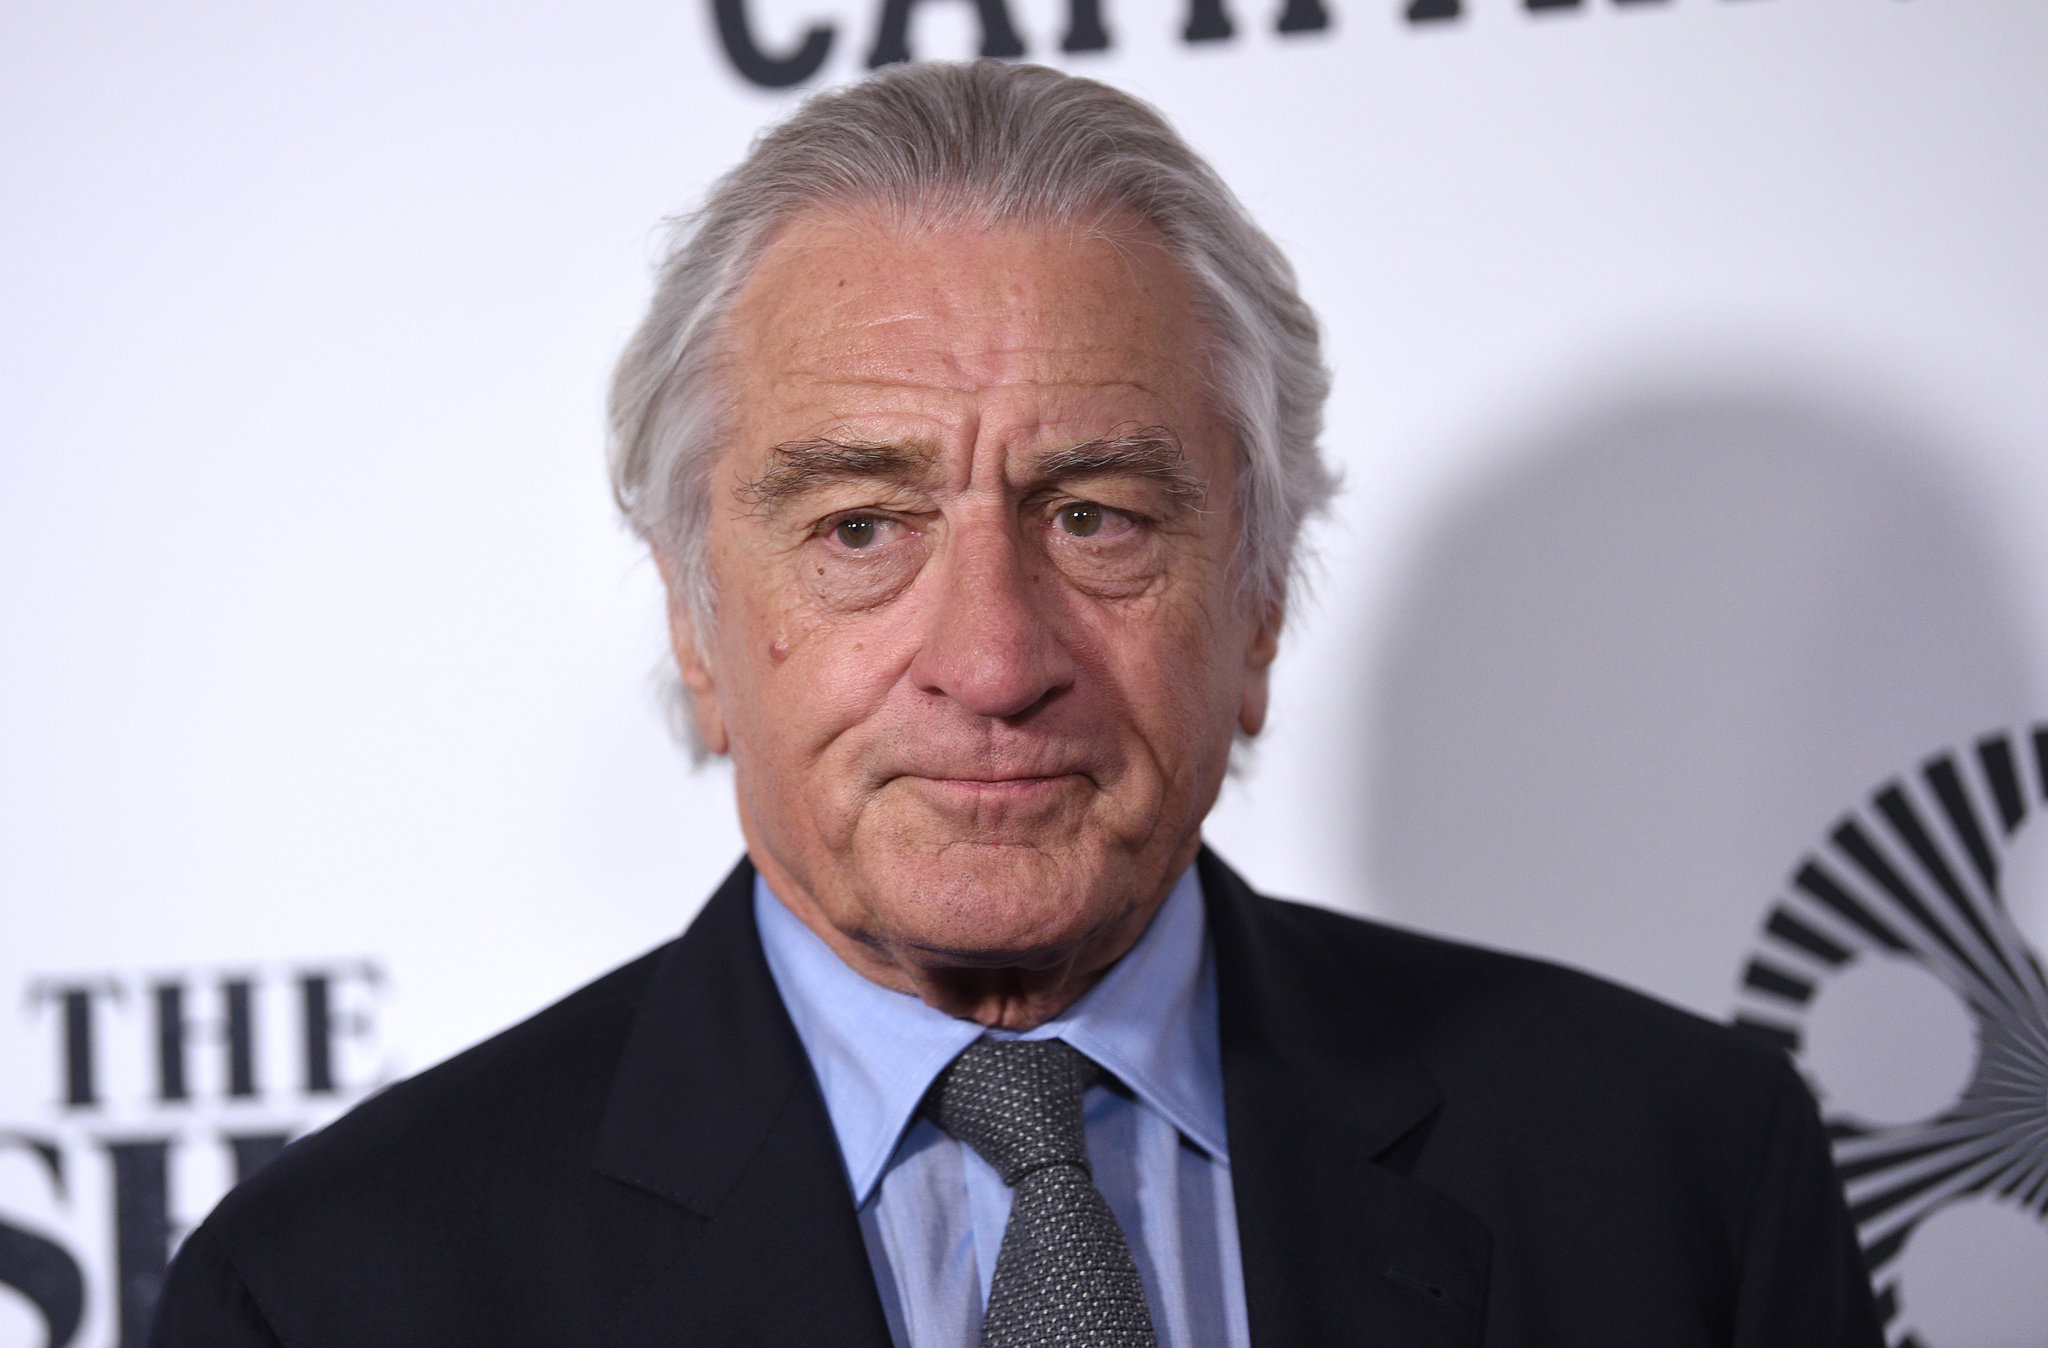 robert De Niro And Exaide Take Each Other To Court Over Office Behavior  The New York Times